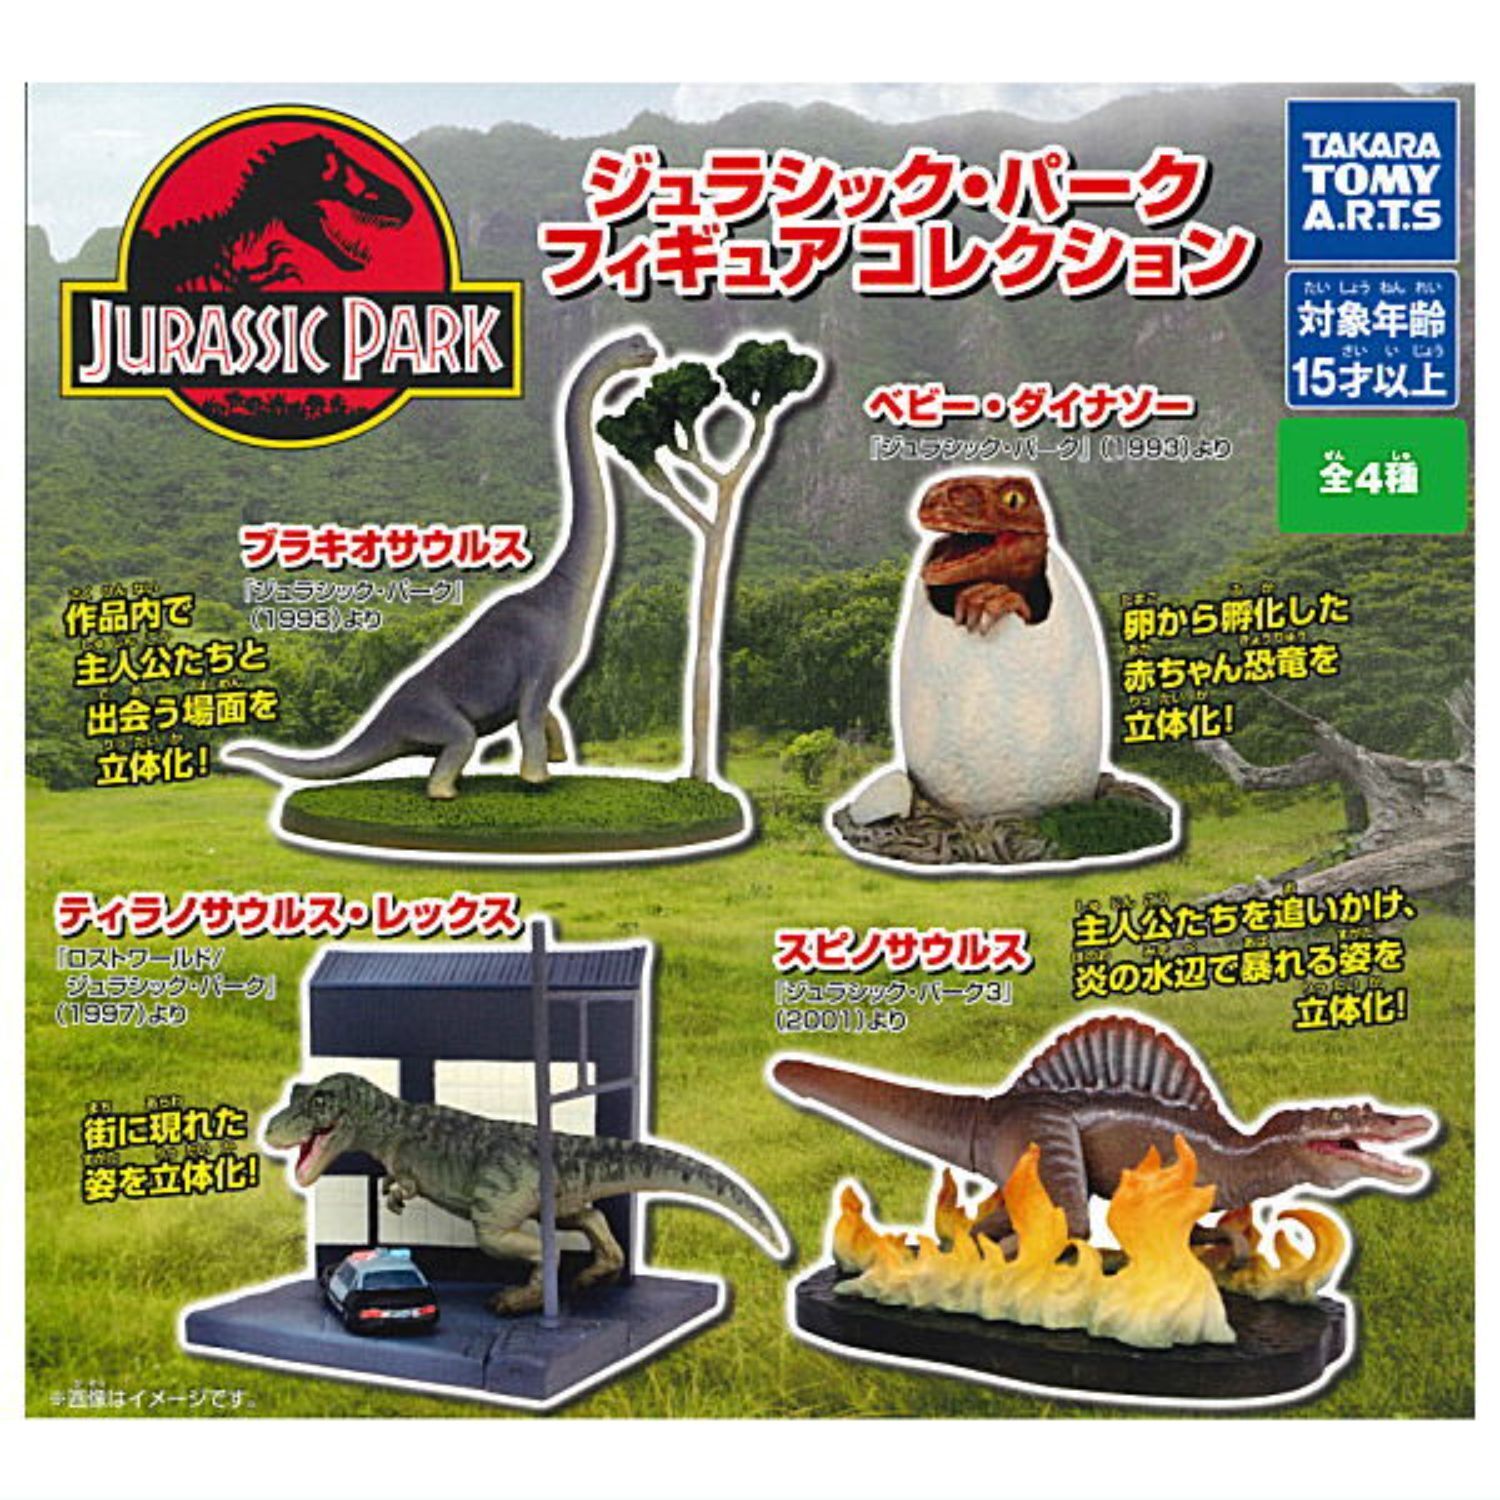 Jurassic Park Figure Collection Capsule Toy 4 Types Full Comp Set Gacha Mascot